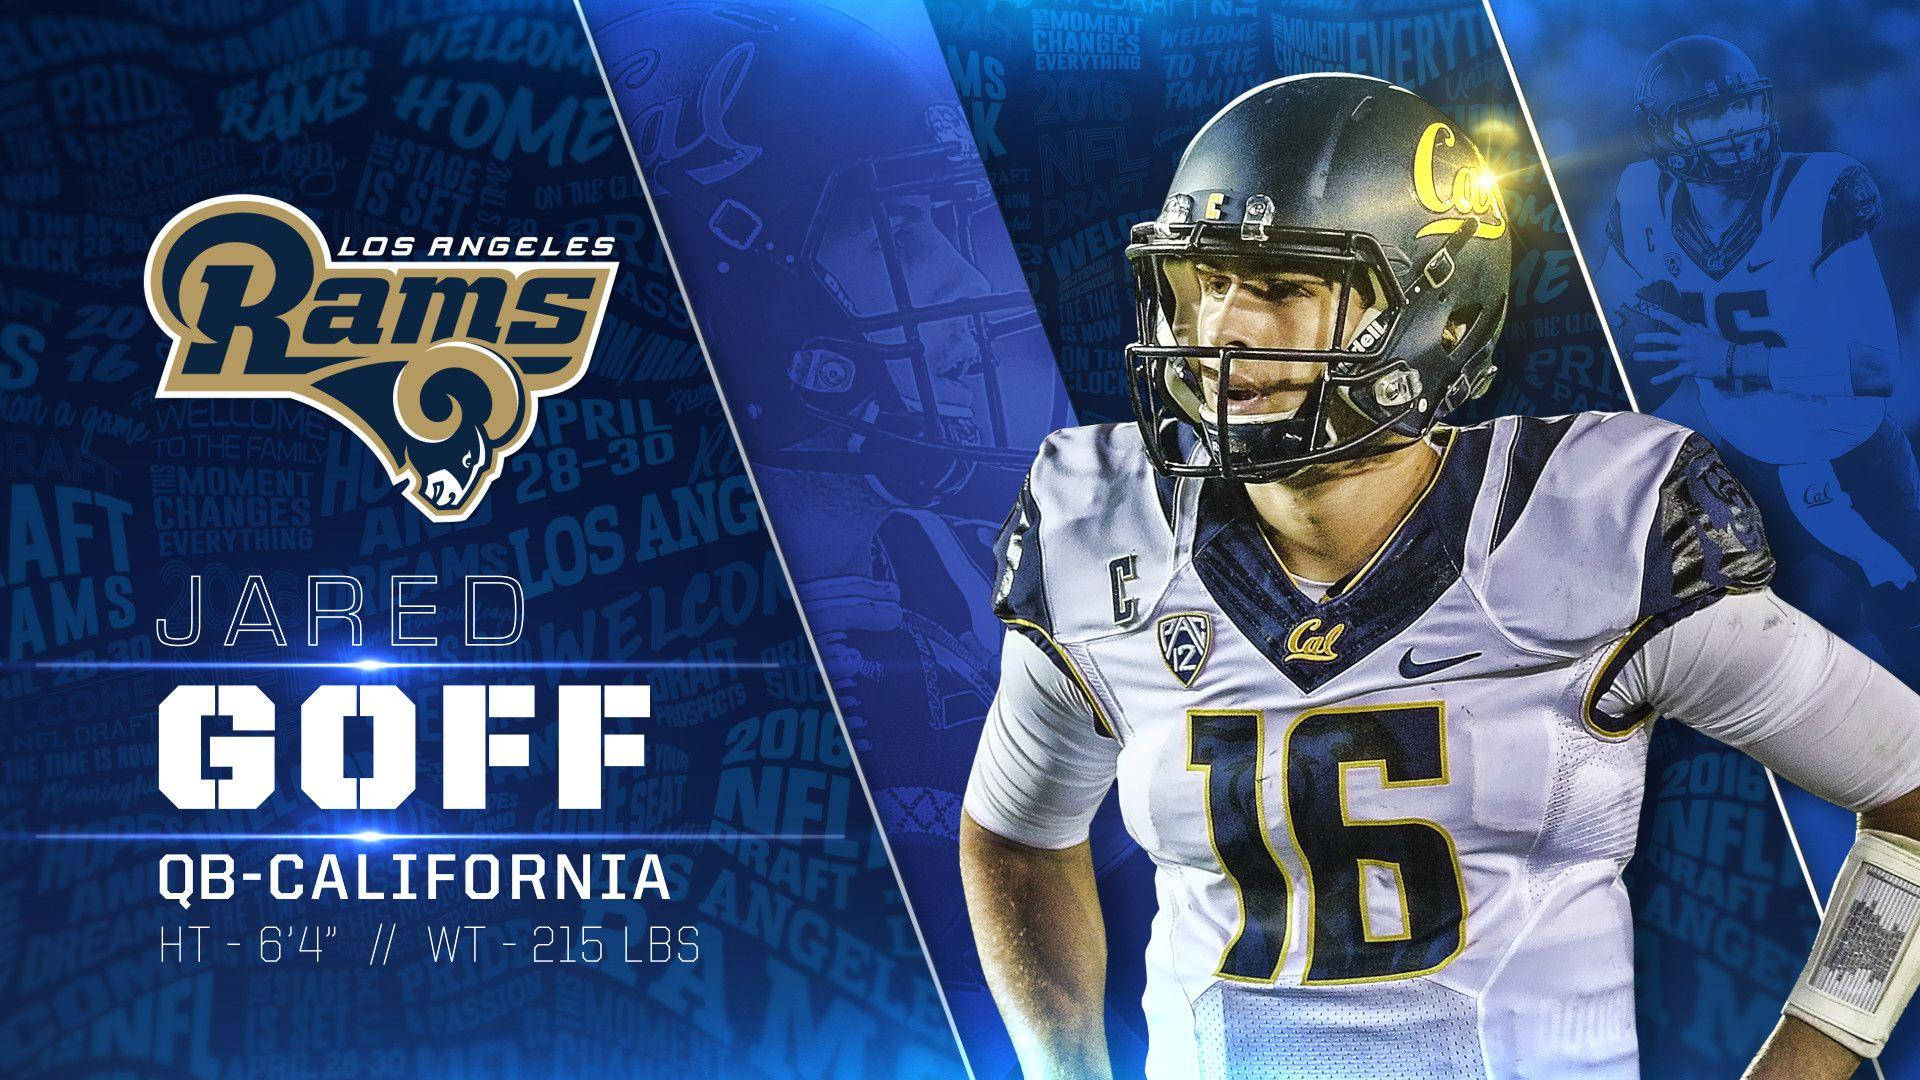 Professional Football Player Jared Goff Photo Card Wallpaper